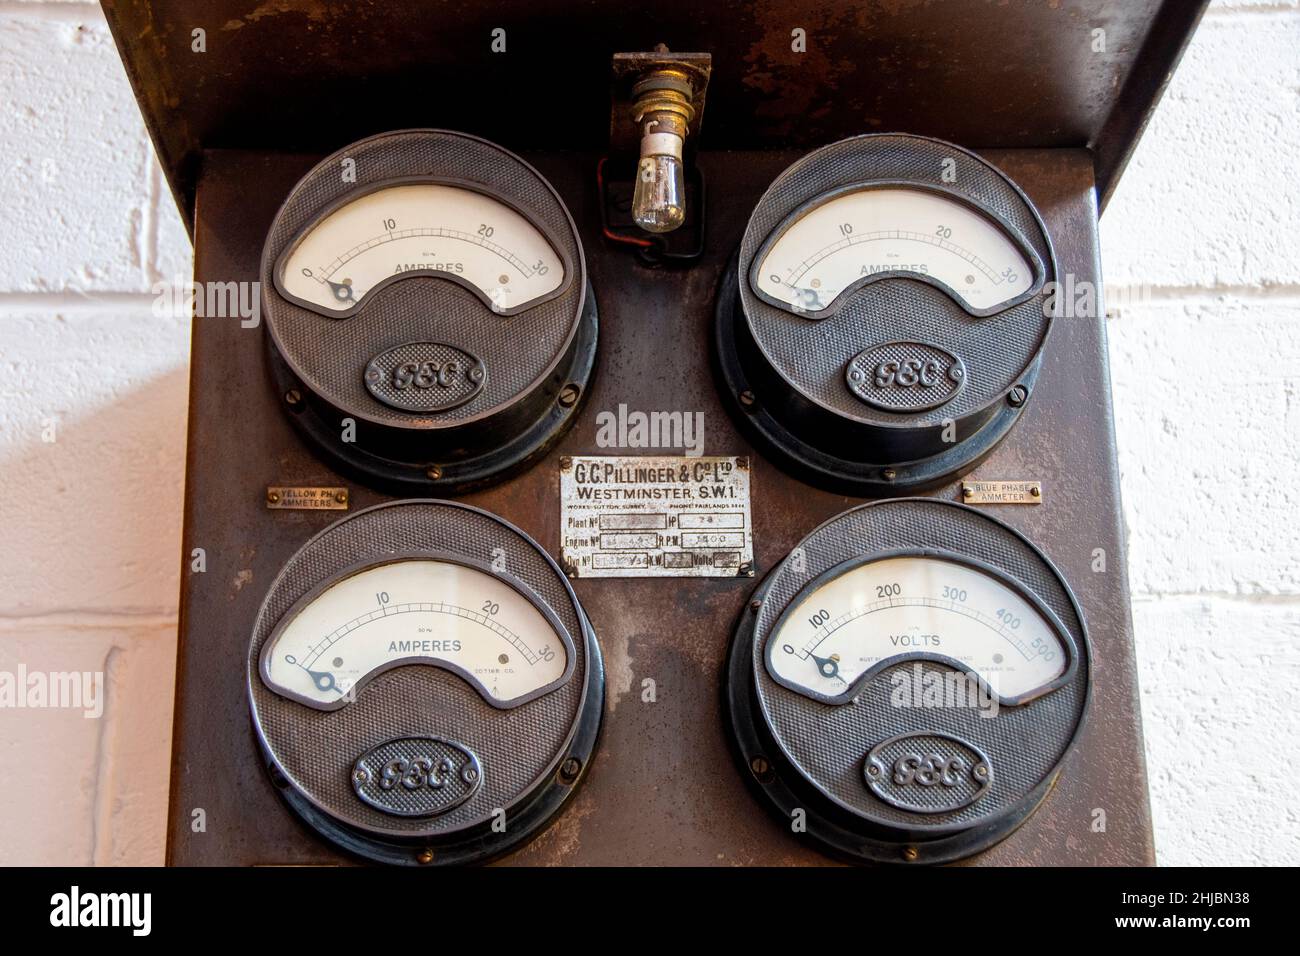 Sheffield,  UK - June 22: Antique electricity volt and amperes meter by G.C. Pillinger & Co in the hallway at Yellow Arch Studios, Kelham Island Stock Photo